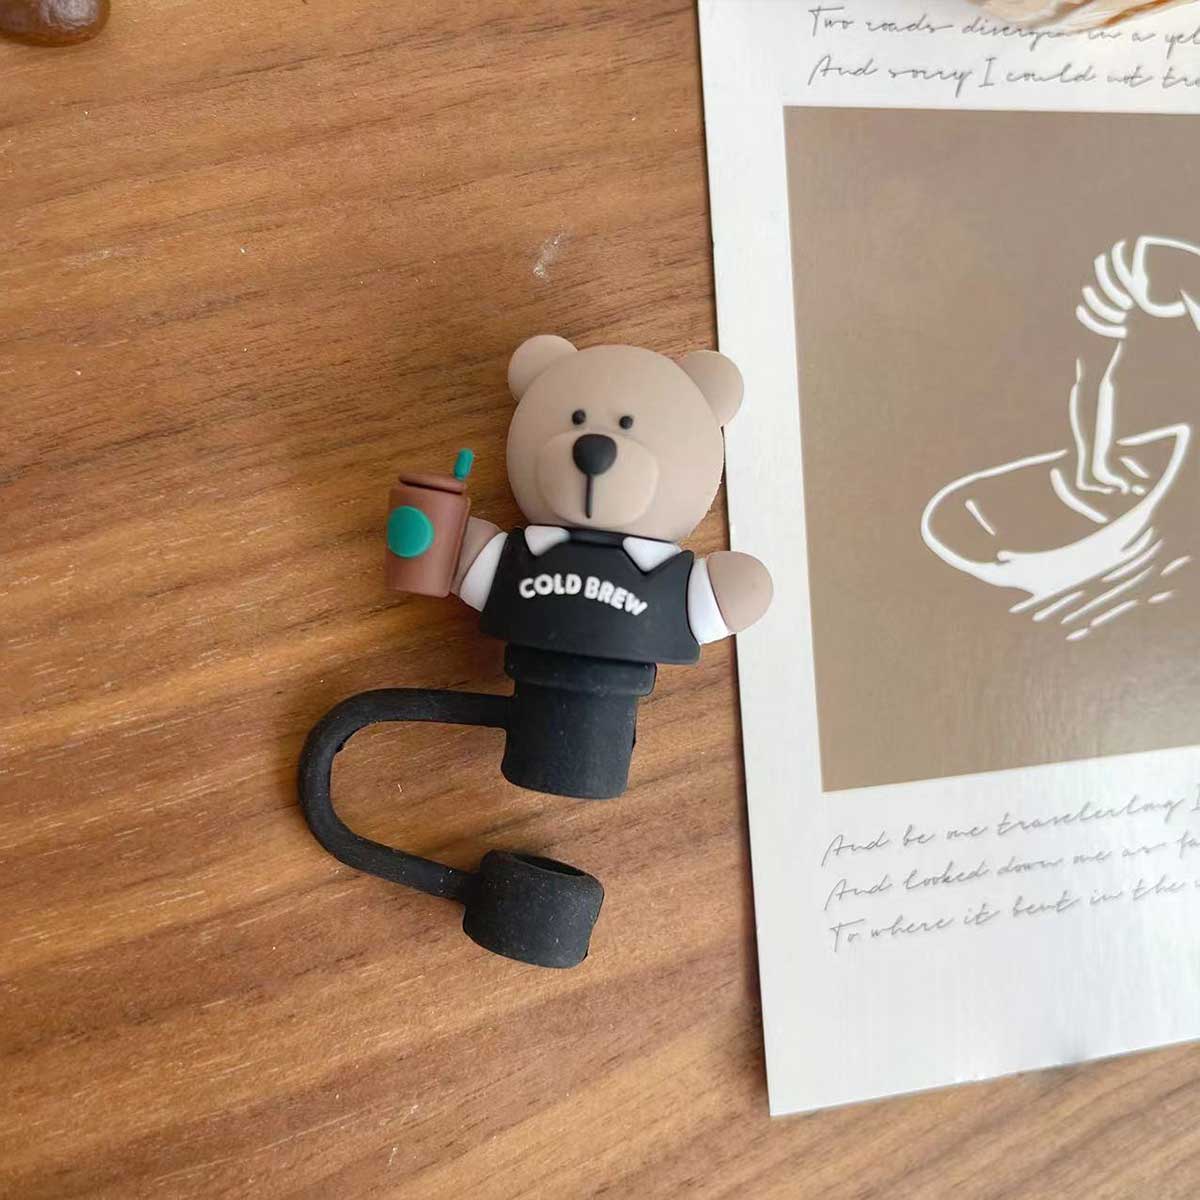 Not Starbucks product, Barista Bear Topper, ONLY topper ,DONOT include